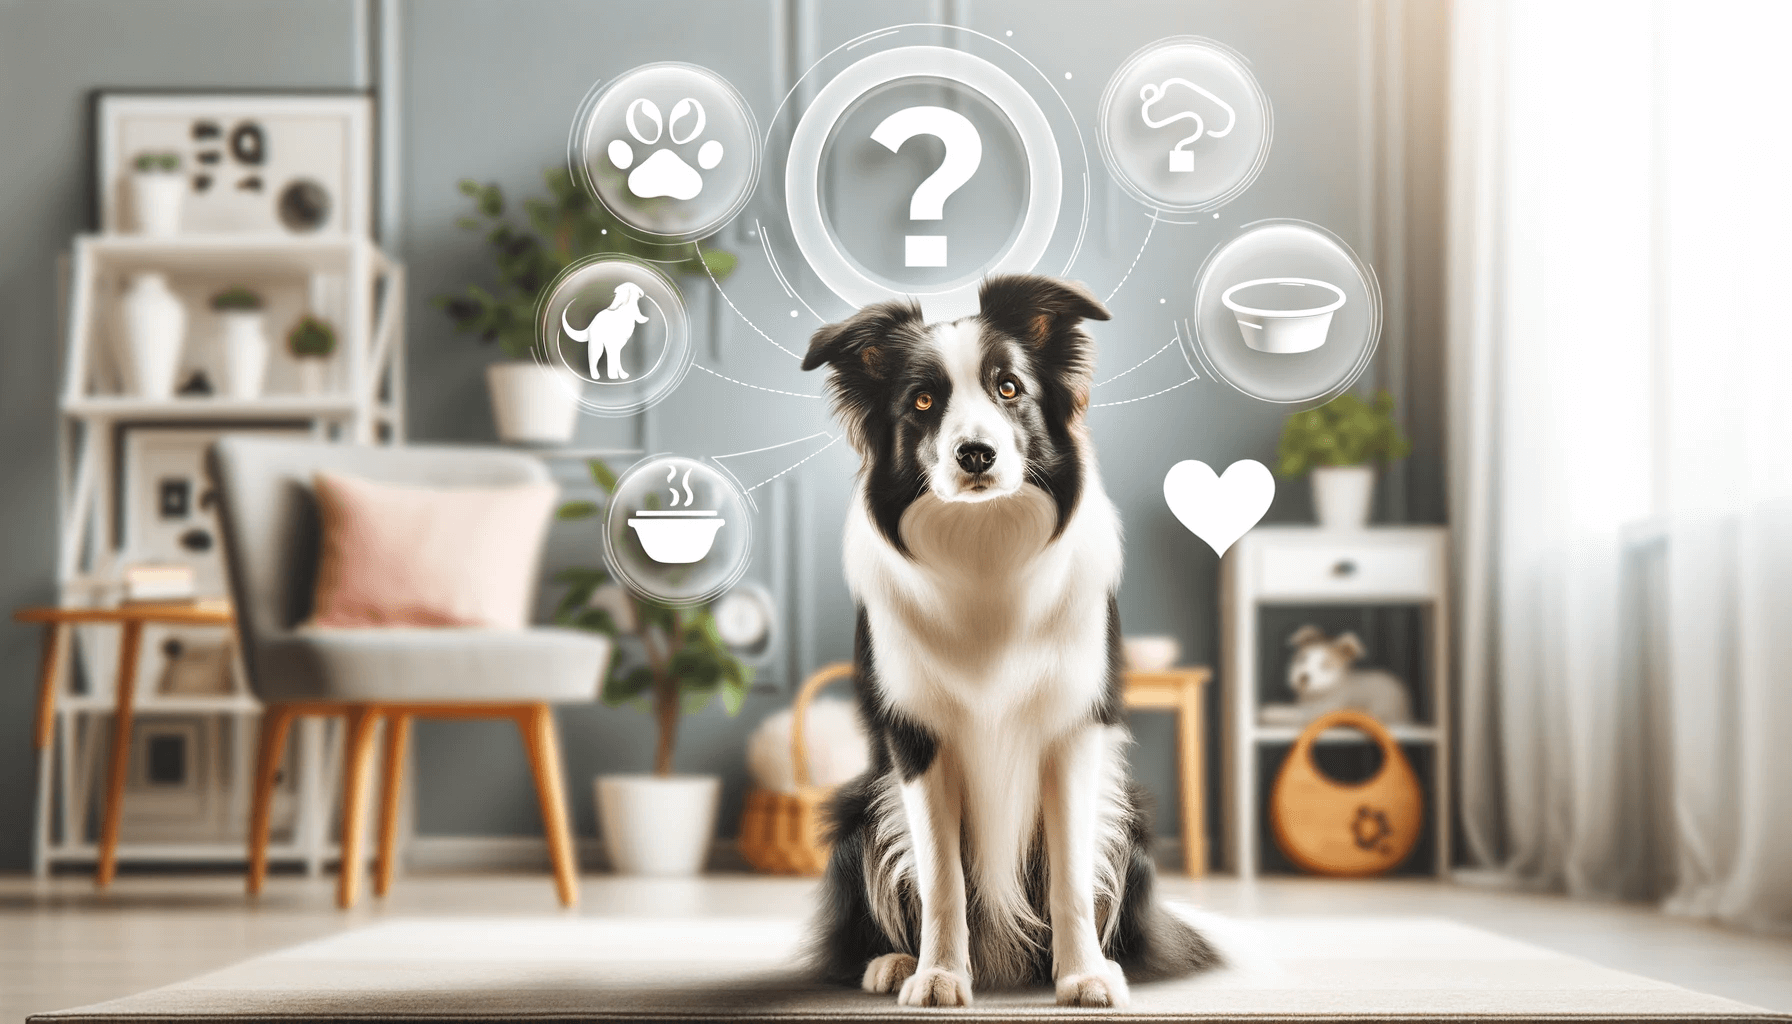 Smooth Coat Border Collie with a question mark above its head, symbolizing frequently asked questions about the breed.